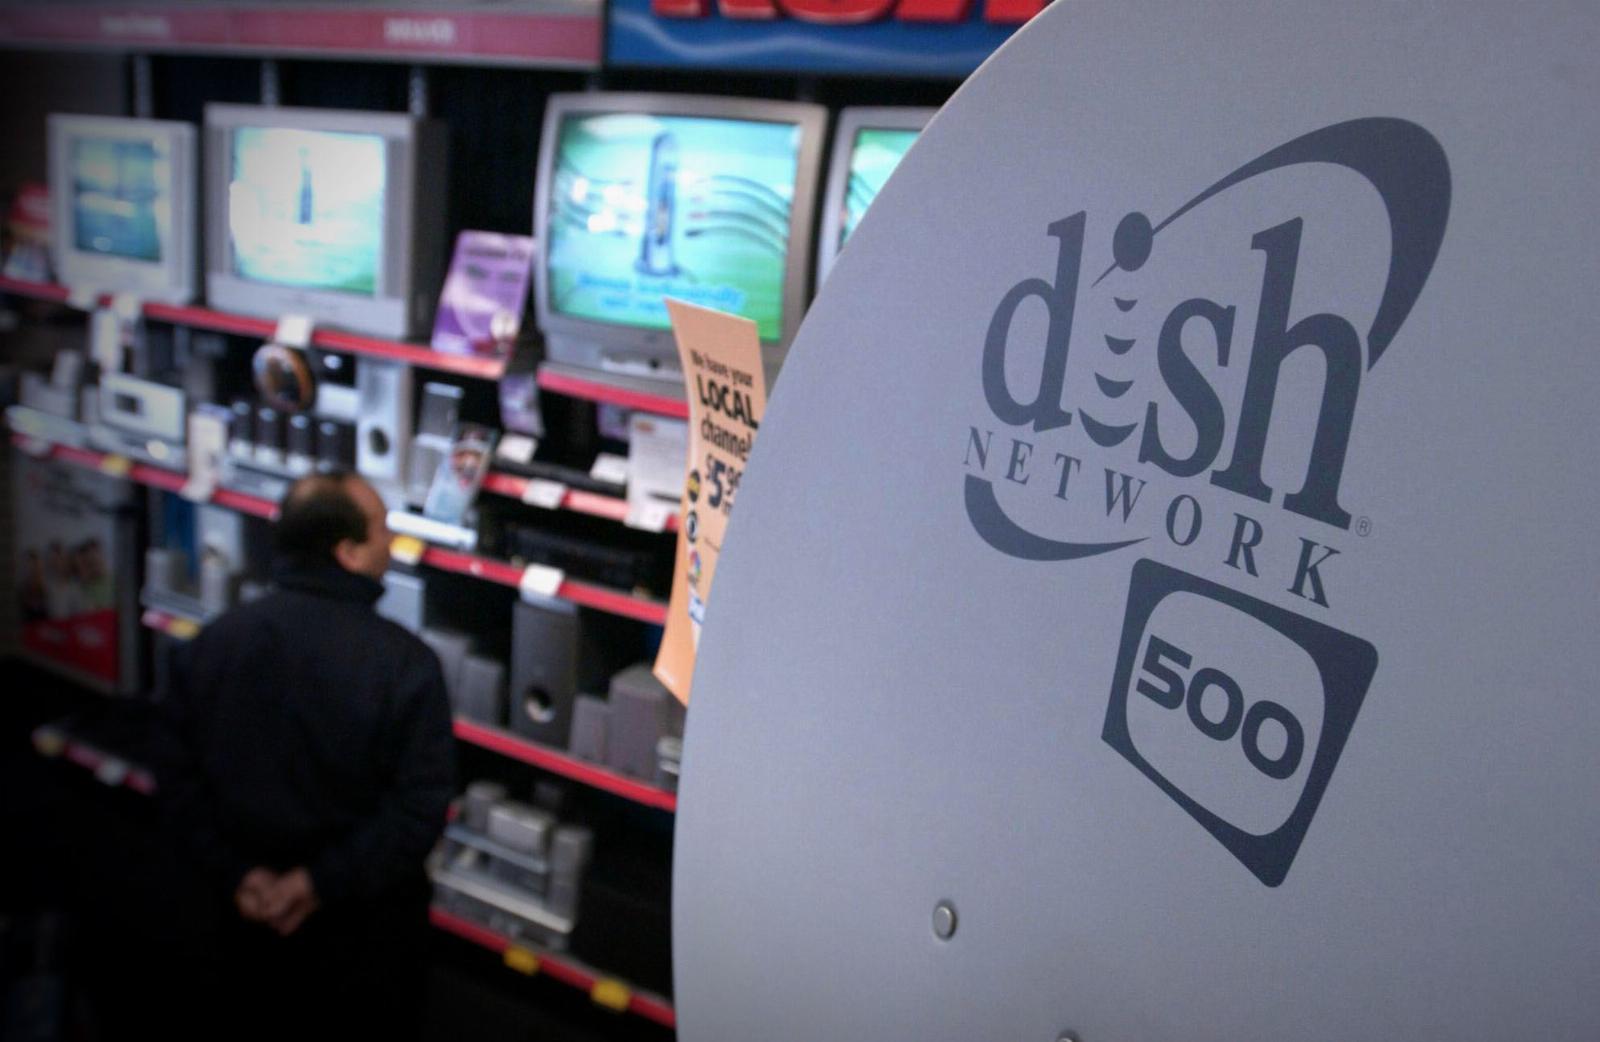 Dish confirms ransomware attack allowed hackers to steal personal data